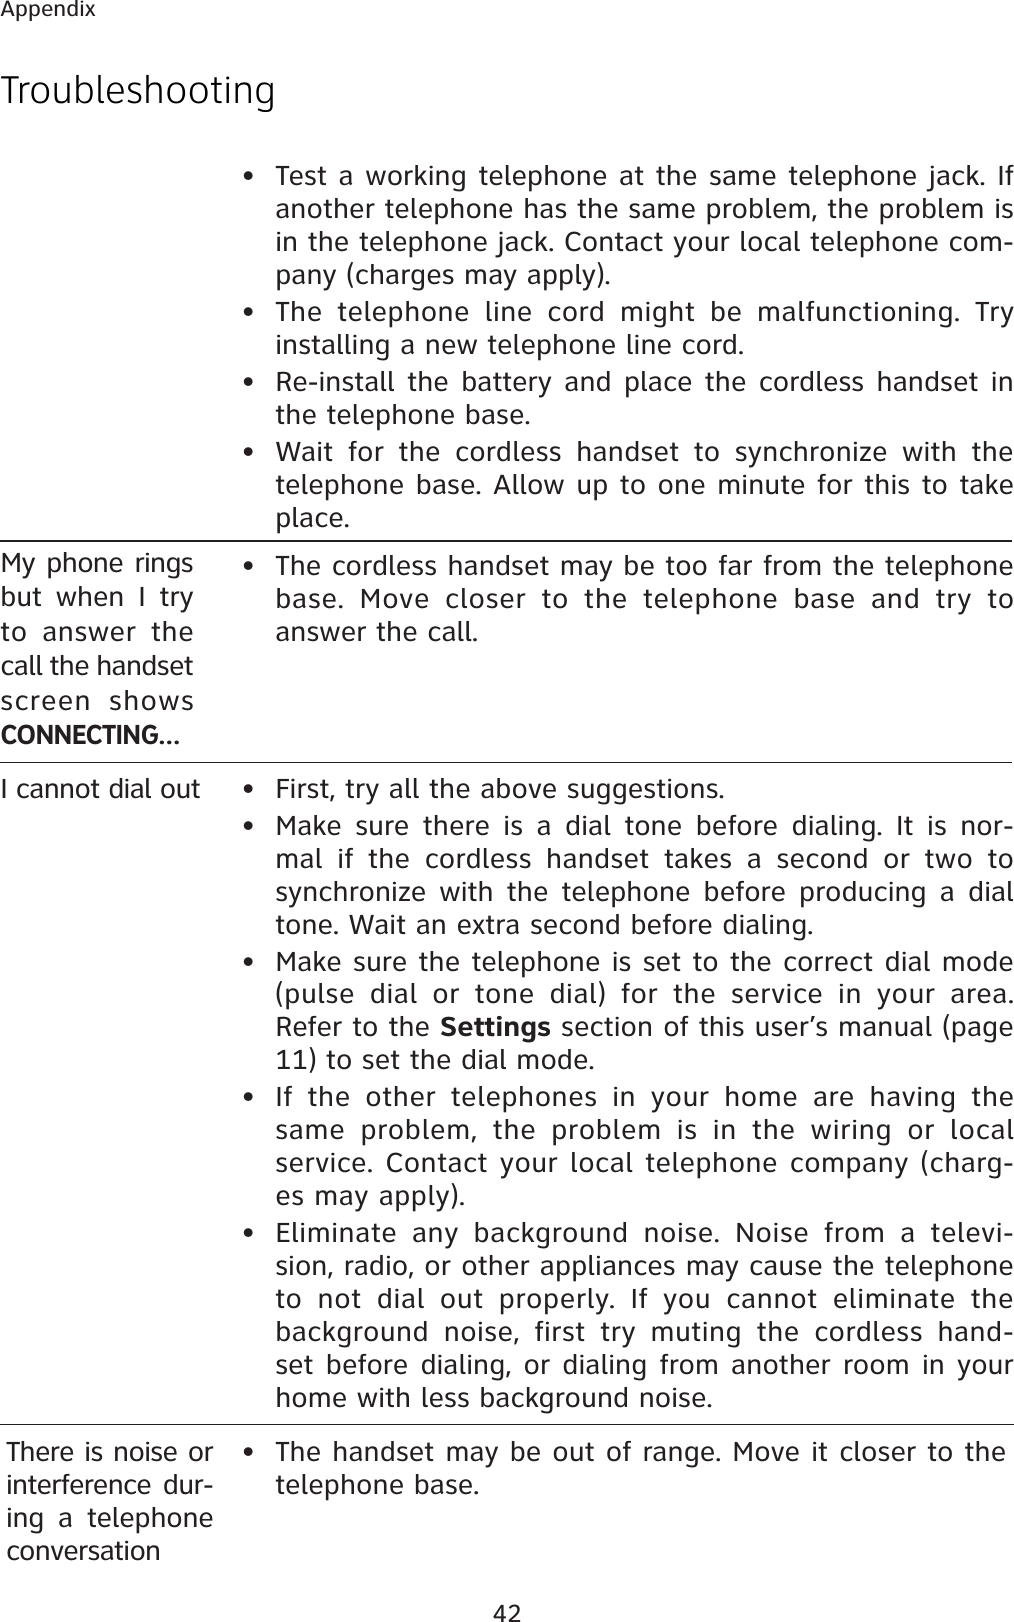 42AppendixTroubleshootingThere is noise or interference dur-ing a telephone conversation• The handset may be out of range. Move it closer to the telephone base.I cannot dial out • First, try all the above suggestions.• Make sure there is a dial tone before dialing. It is nor-mal if the cordless handset takes a second or two to synchronize with the telephone before producing a dial tone. Wait an extra second before dialing.• Make sure the telephone is set to the correct dial mode (pulse dial or tone dial) for the service in your area. Refer to the Settings section of this user’s manual (page 11) to set the dial mode.• If the other telephones in your home are having the same problem, the problem is in the wiring or local service. Contact your local telephone company (charg-es may apply).• Eliminate any background noise. Noise from a televi-sion, radio, or other appliances may cause the telephone to not dial out properly. If you cannot eliminate the background noise, first try muting the cordless hand-set before dialing, or dialing from another room in your home with less background noise.  My phone rings but when I try to answer the call the handset screen shows CONNECTING…• The cordless handset may be too far from the telephone base. Move closer to the telephone base and try to answer the call.• Test a working telephone at the same telephone jack. If another telephone has the same problem, the problem is in the telephone jack. Contact your local telephone com-pany (charges may apply).• The telephone line cord might be malfunctioning. Try installing a new telephone line cord.• Re-install the battery and place the cordless handset in the telephone base.• Wait for the cordless handset to synchronize with the telephone base. Allow up to one minute for this to take place.